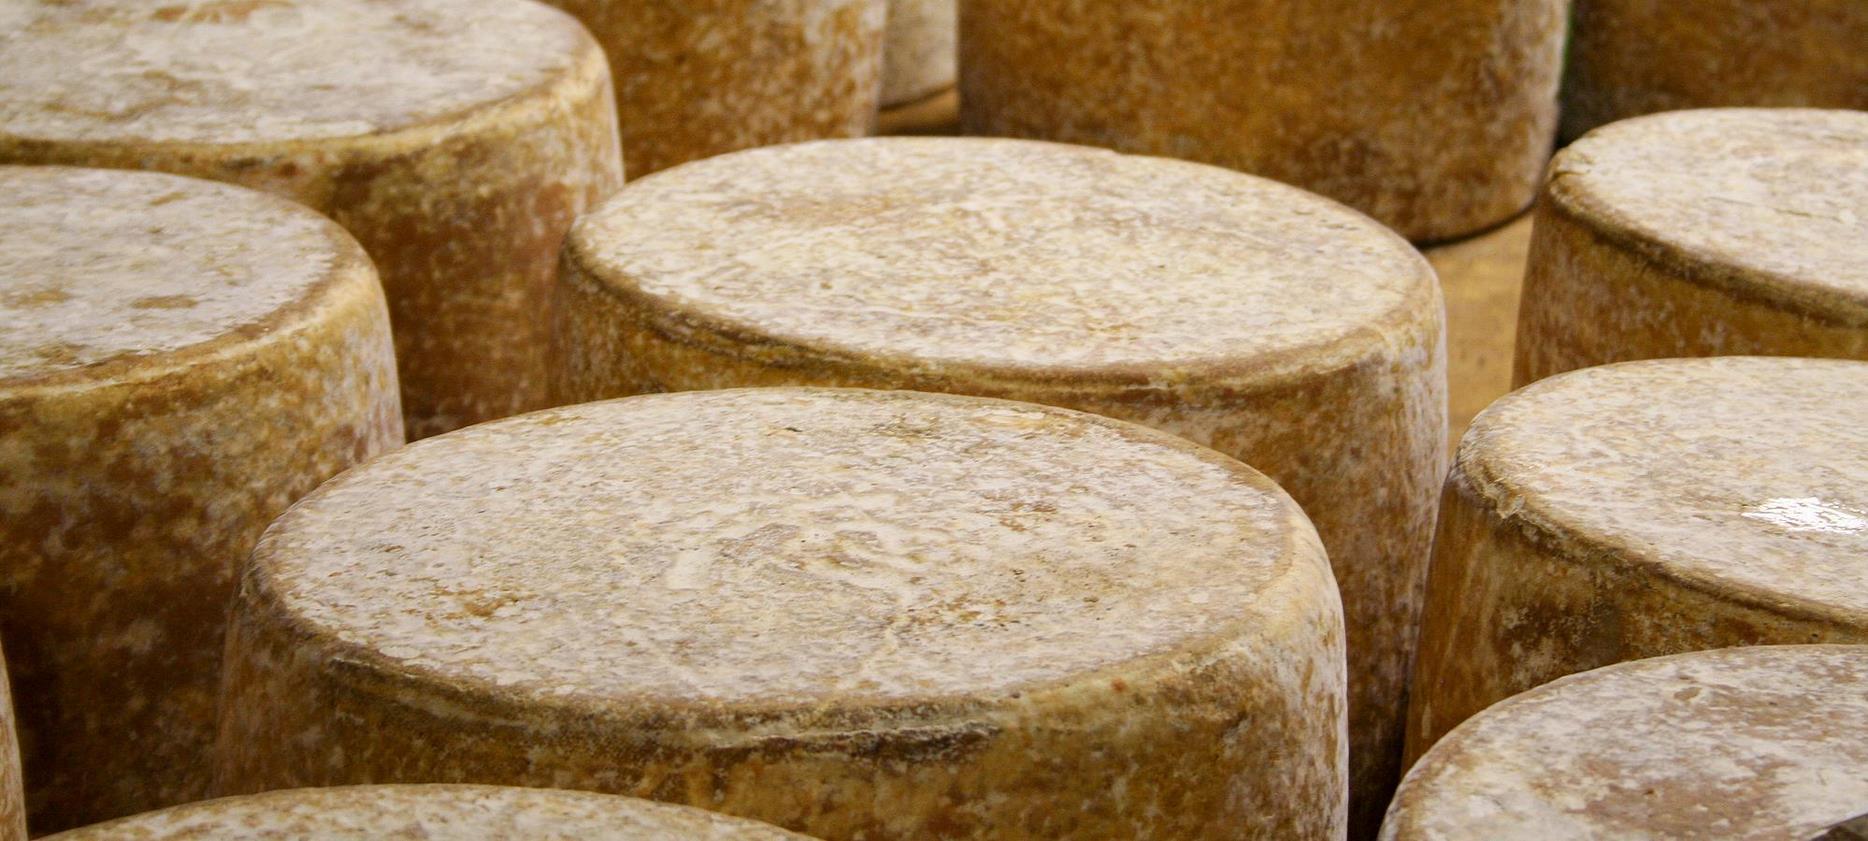 AOP Auvergne cheese - Aging of Cantal in the cellar